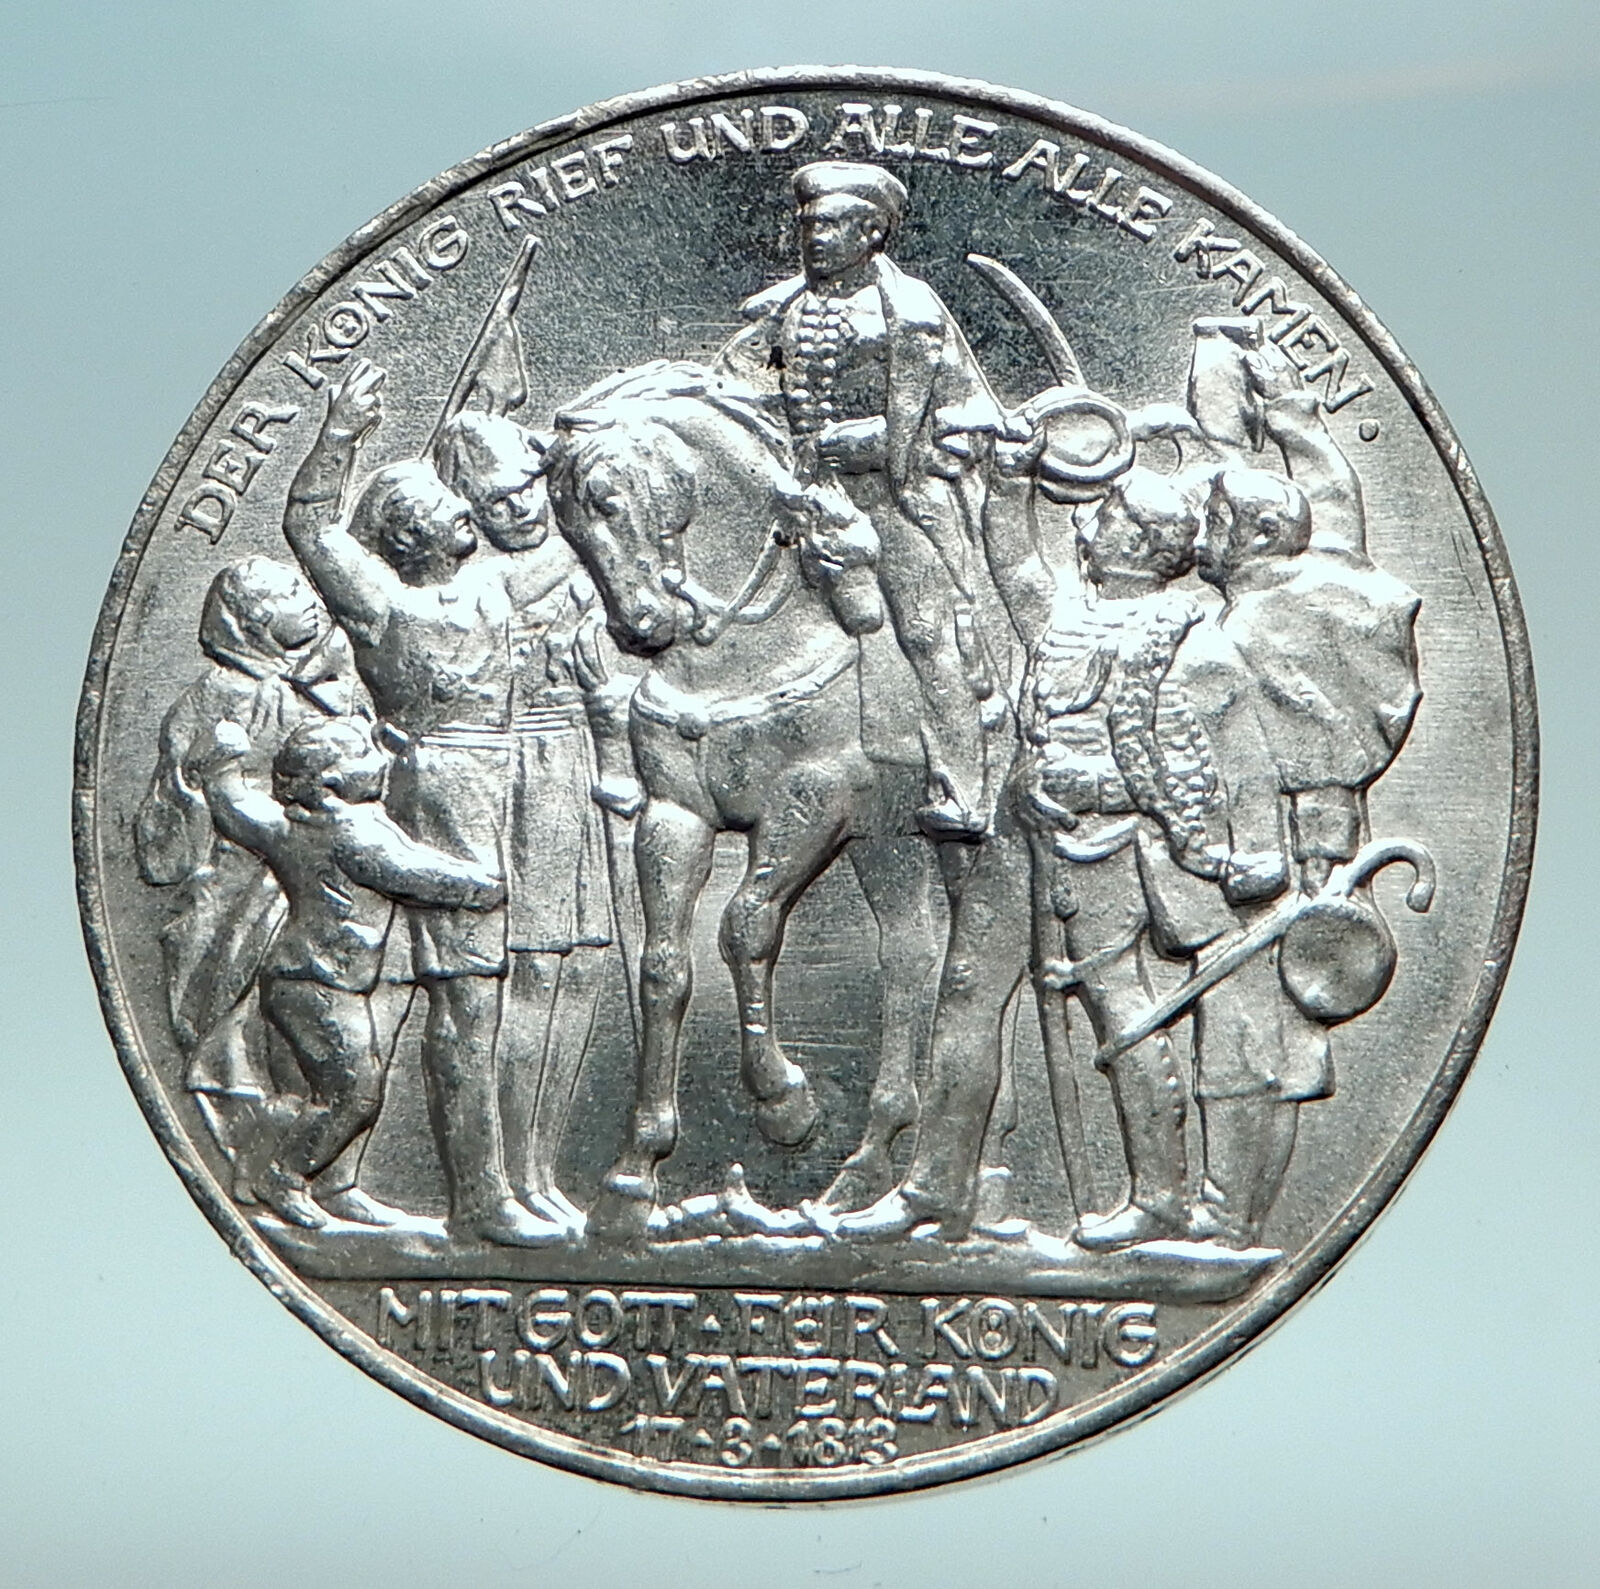 1913 GERMANY William III Prussia War NAPOLEON Antique Silver 3 MARK Coin i82654